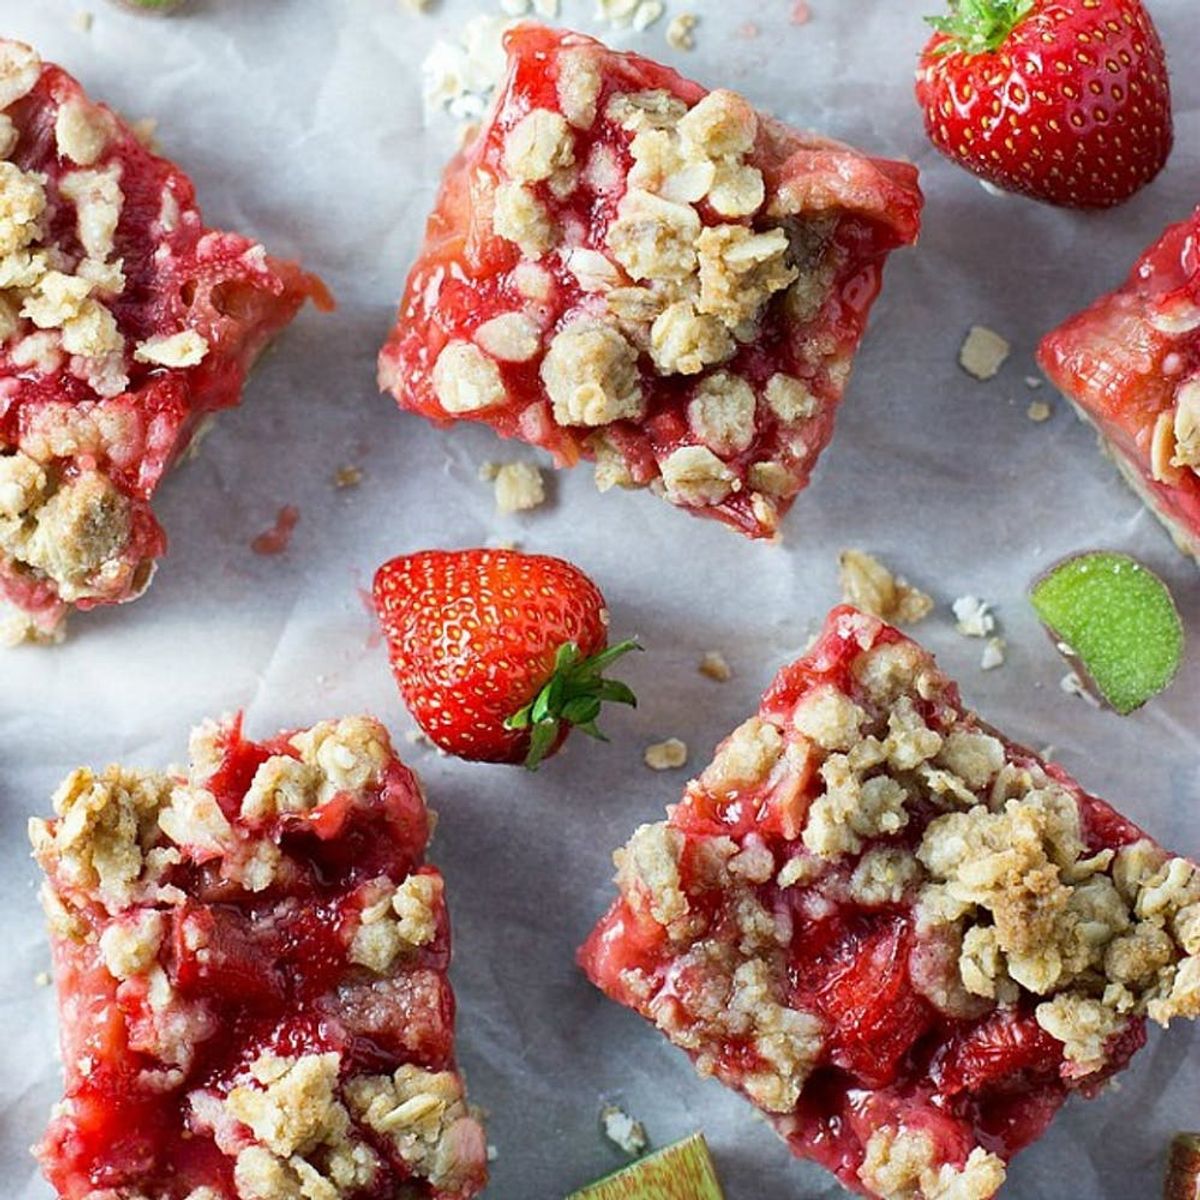 13 Strawberry Dessert Recipes to Welcome the Summer